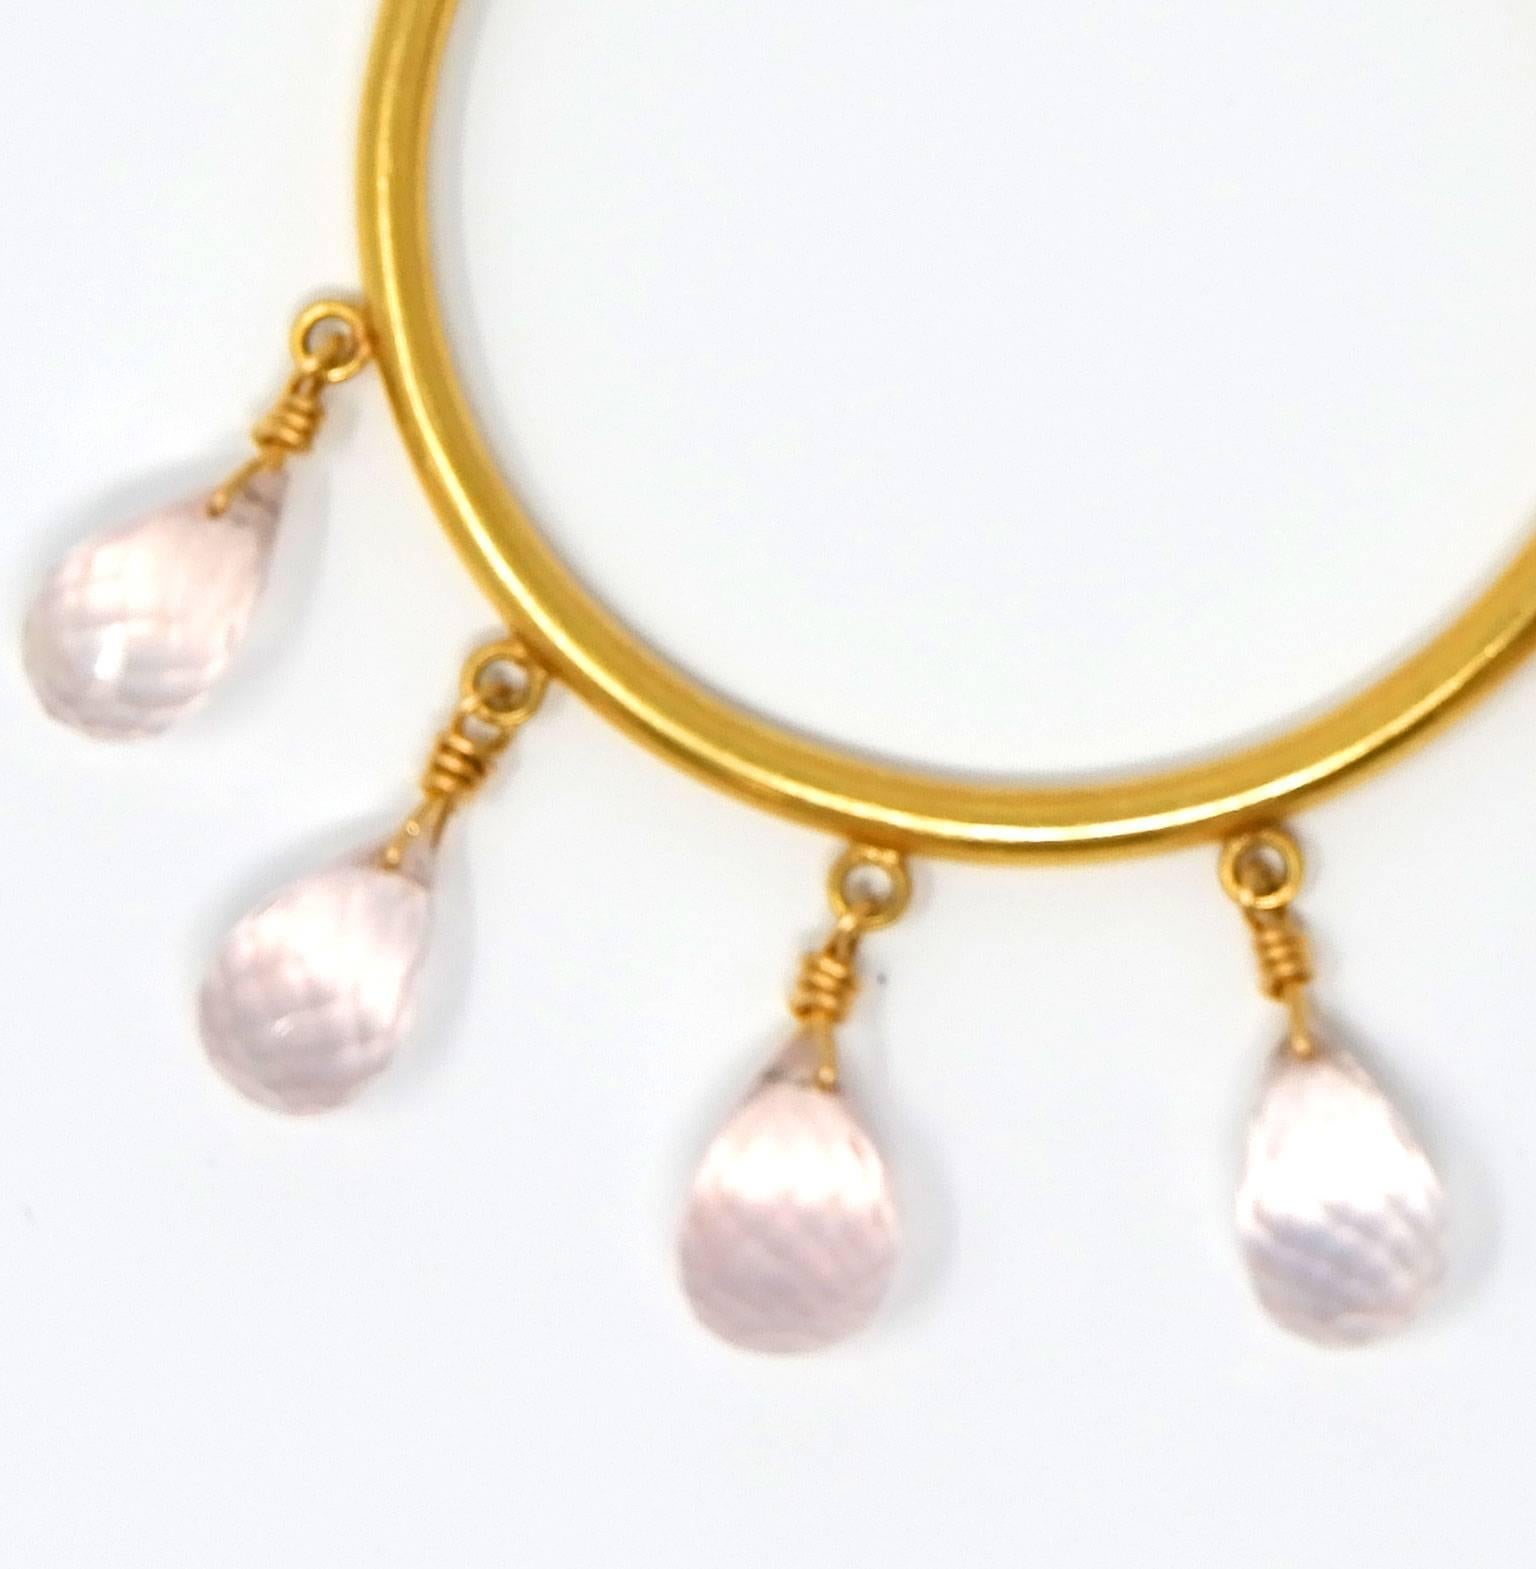 Contemporary Gold and Rose Quartz Hoop Bead Earrings